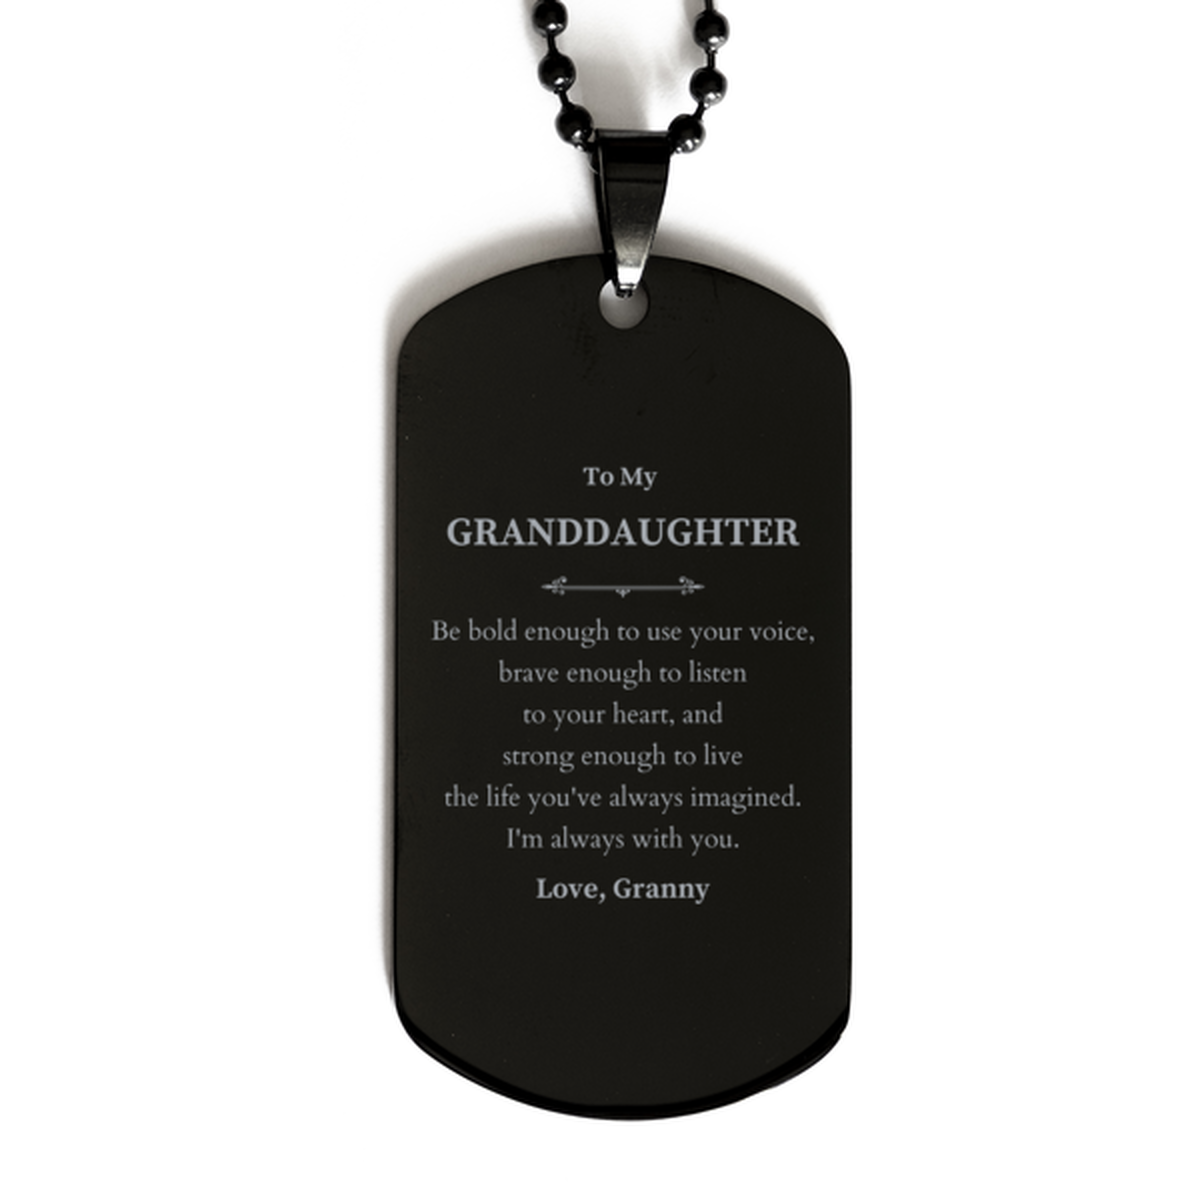 Keepsake Granddaughter Black Dog Tag Gift Idea Graduation Christmas Birthday Granddaughter from Granny, Granddaughter Be bold enough to use your voice, brave enough to listen to your heart. Love, Granny